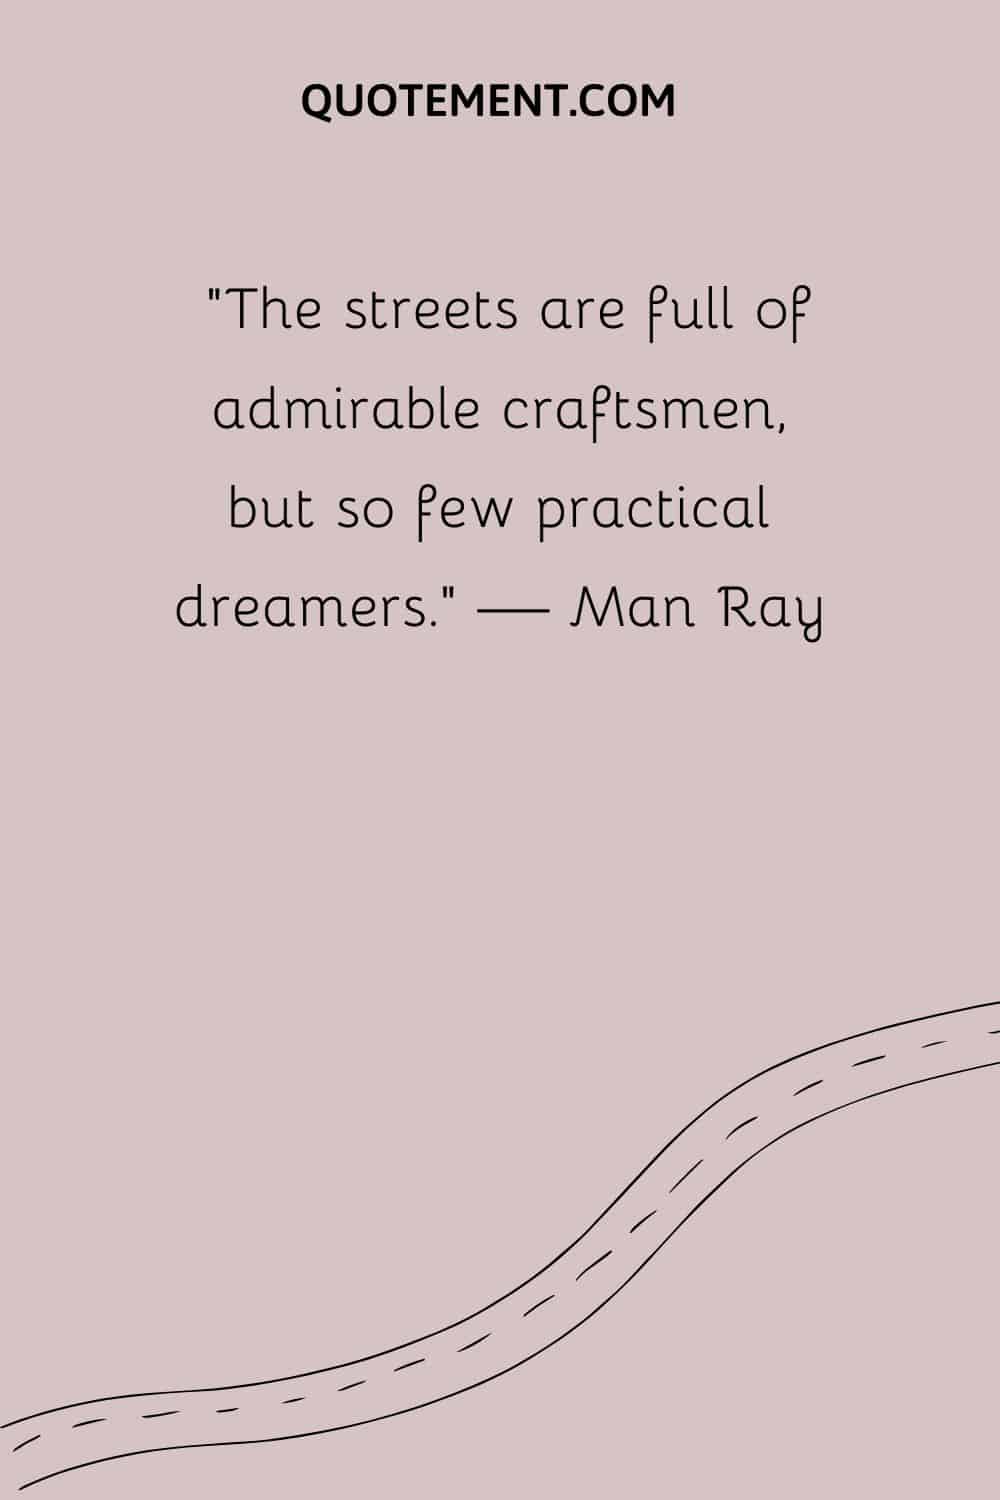 The streets are full of admirable craftsmen, but so few practical dreamers